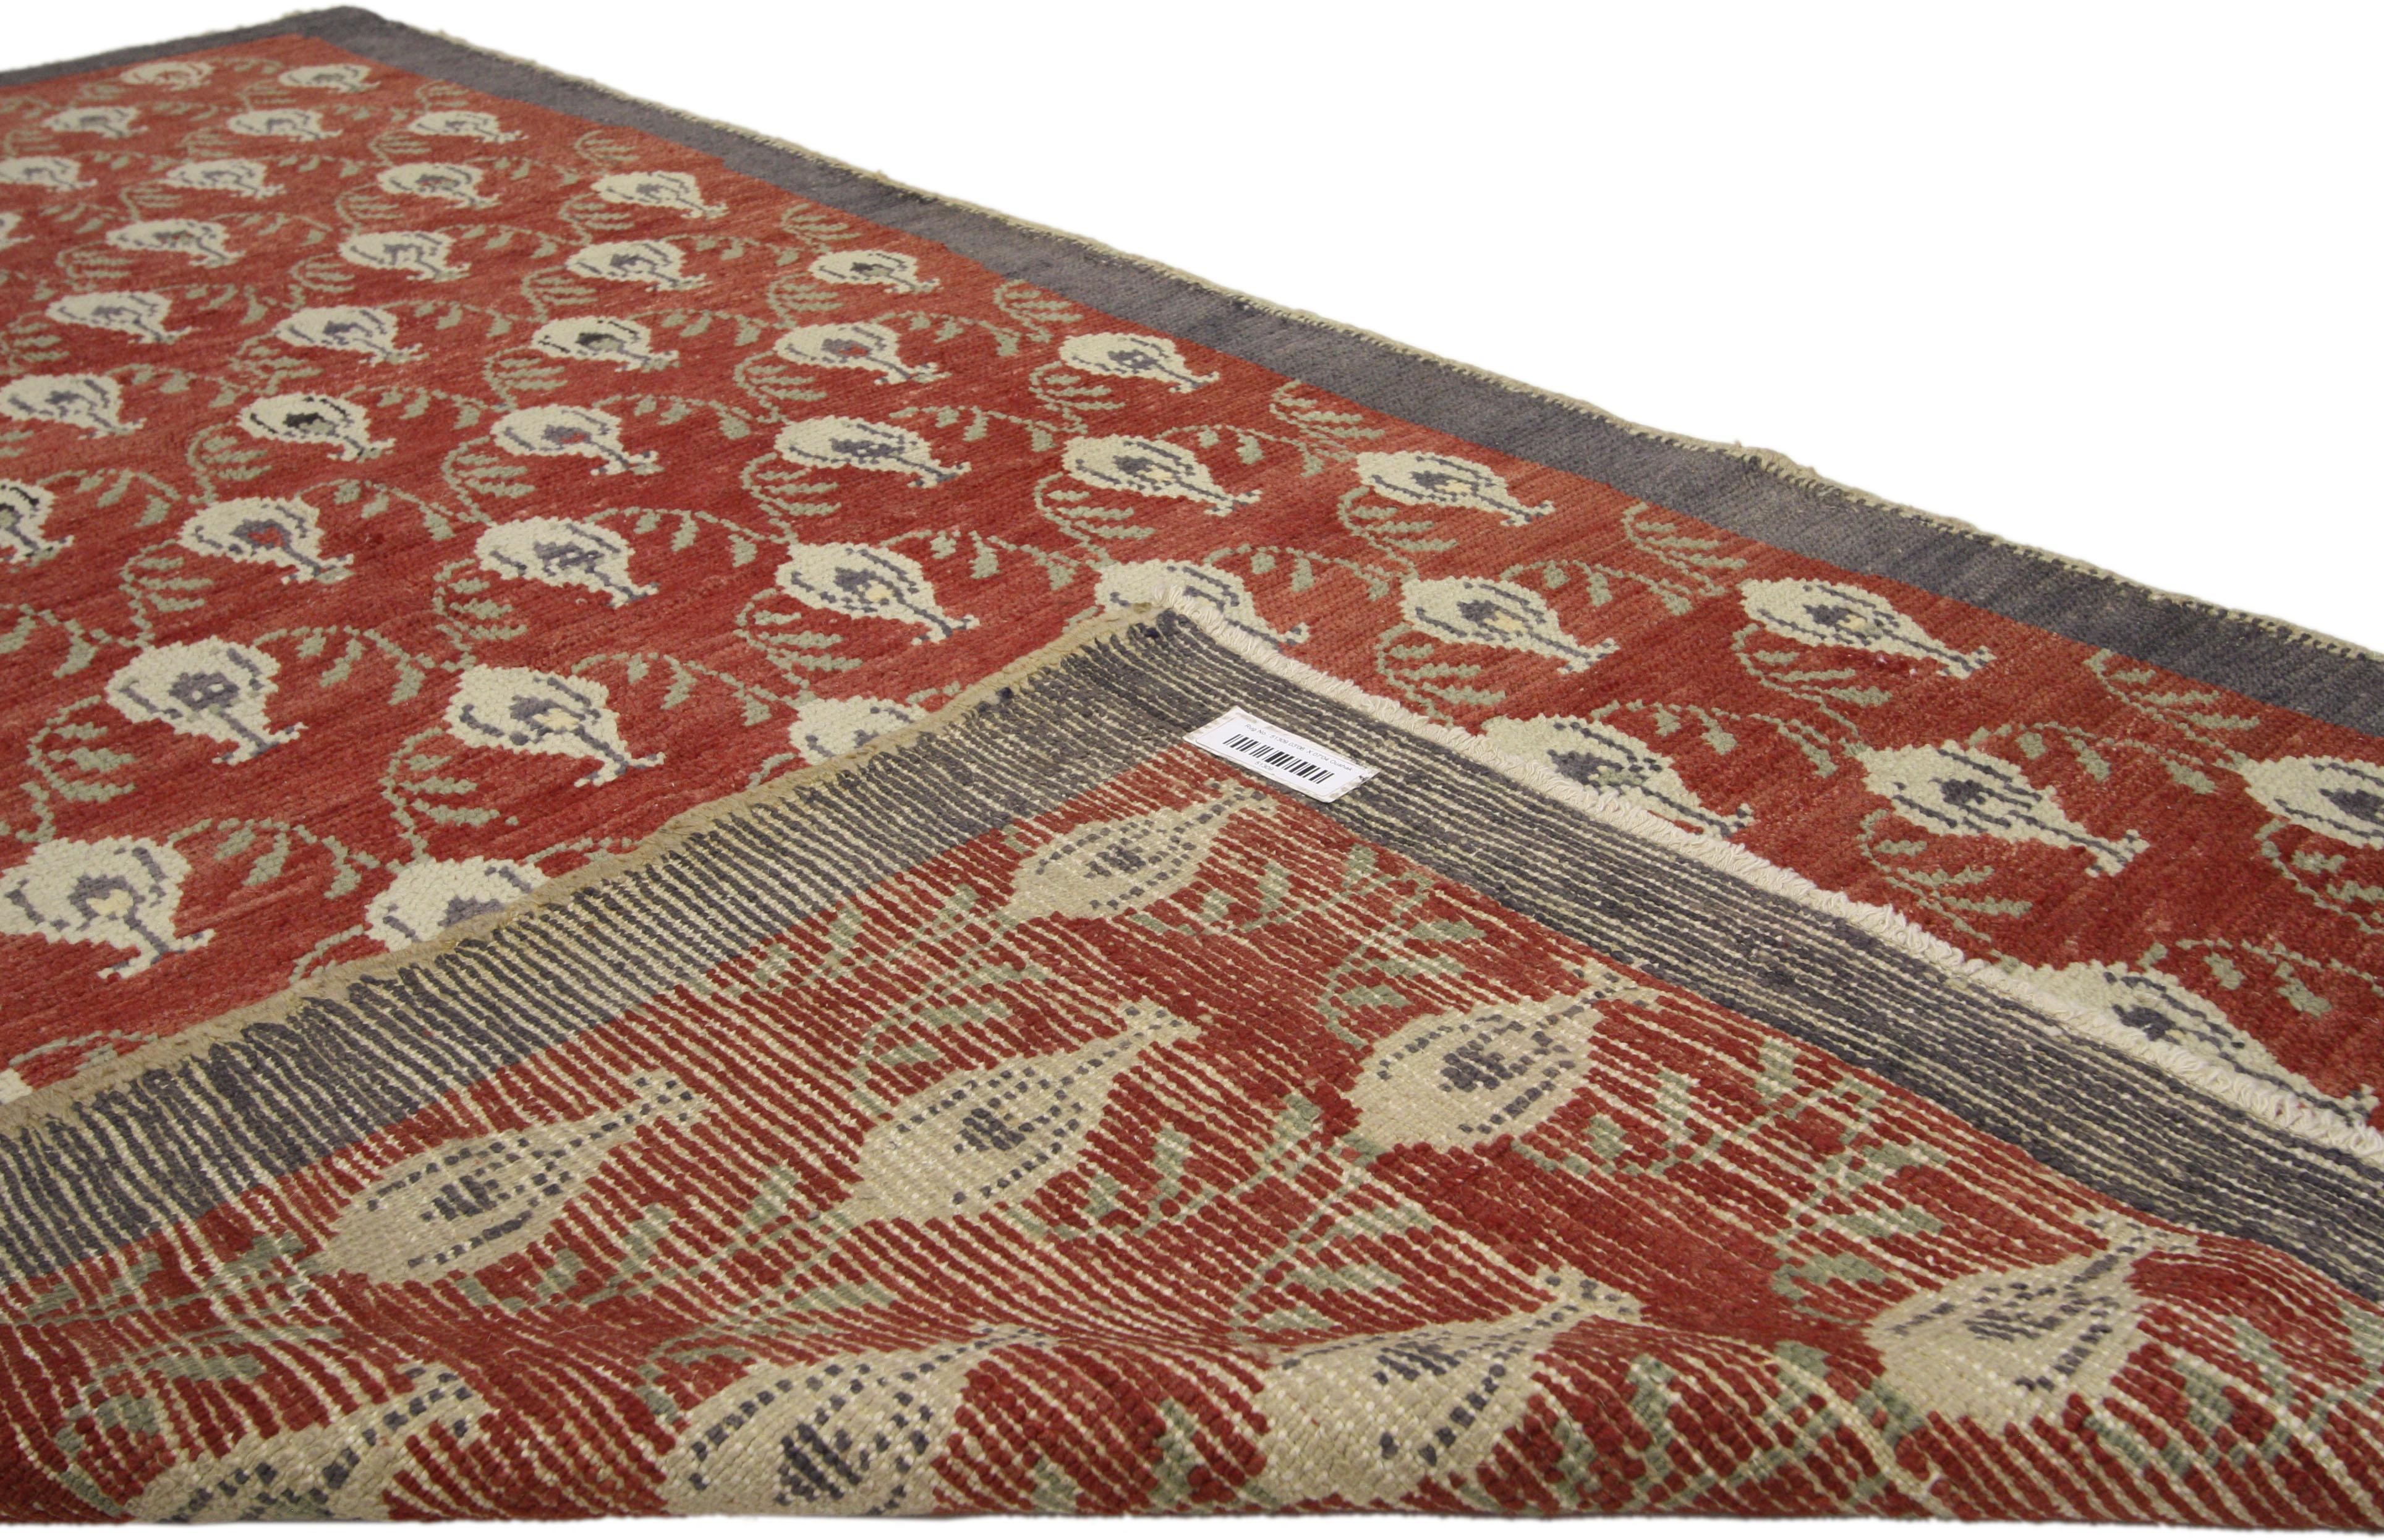 Vintage Turkish Oushak Rug with Romantic Craftsman Style In Good Condition For Sale In Dallas, TX